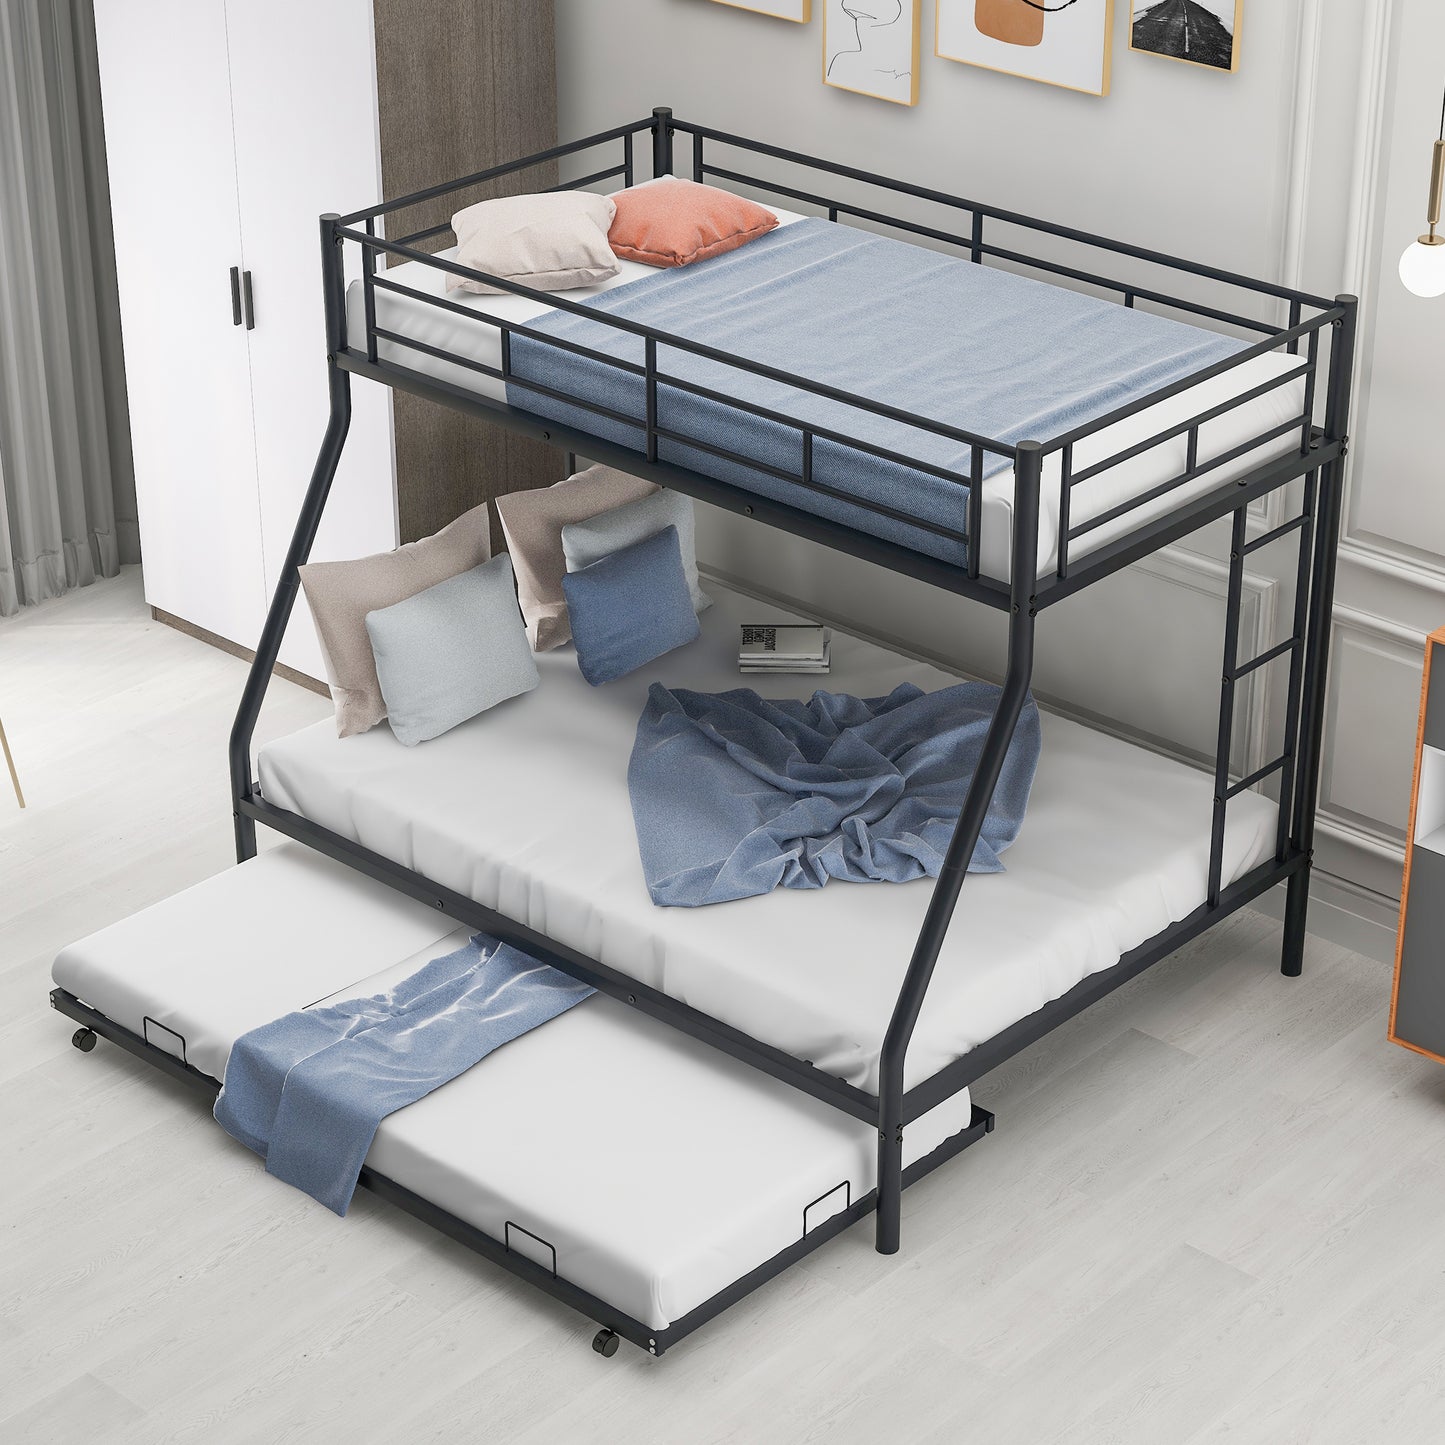 Bunk Bed Twin Over Twin, HSUNNS Metal Bunk Bed with Trundle, Twin Size Convertible Trundle Bunk Bed Frame for Kids Teens, Dorm Room Metal Twin Bed Frame with Ladder, No Box Spring Needed, Silver, A4279